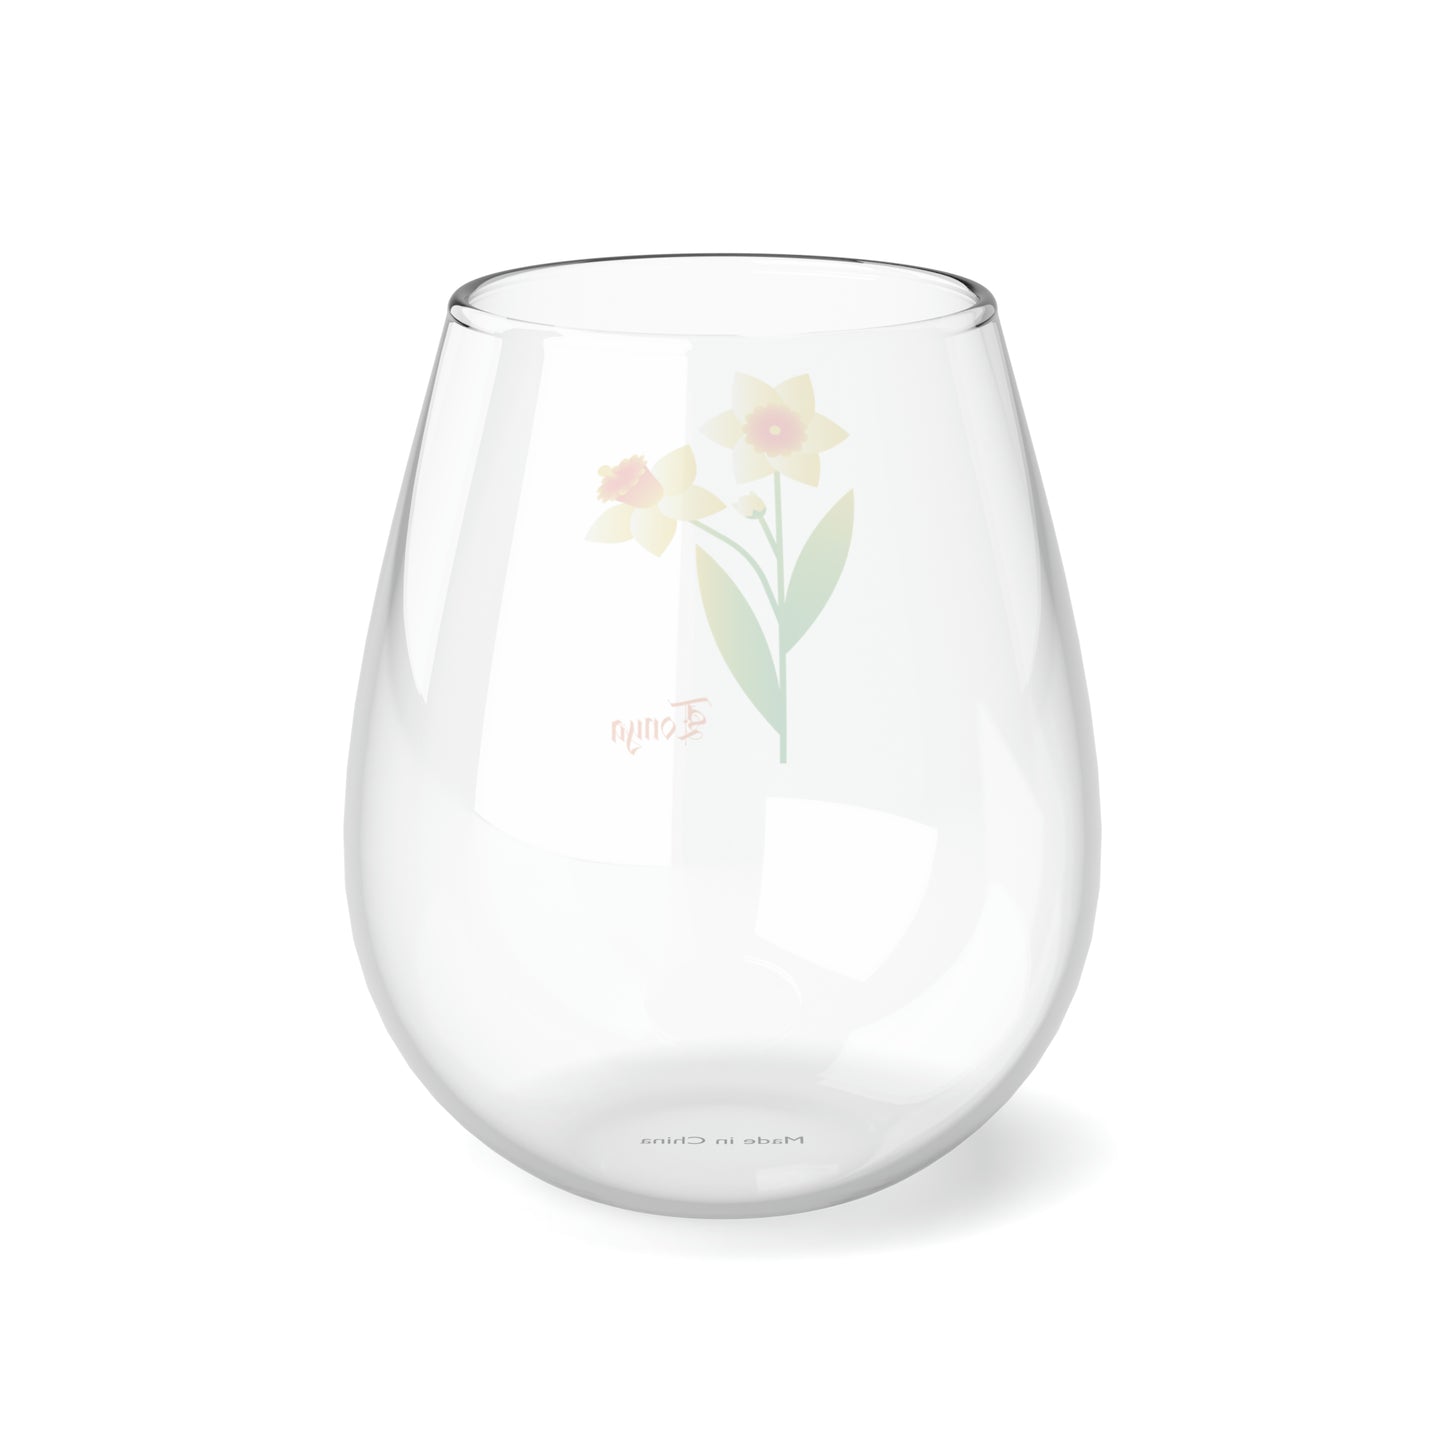 March PERSONALIZED Birth Flower Wine Glass, Birth Flower Gifts, Birth Flower wine glass, Birth Flower Gifts for Women, Gift for coworker, sister gift, birthday gift, Valentine gift, Stemless Wine Glass, 11.75oz